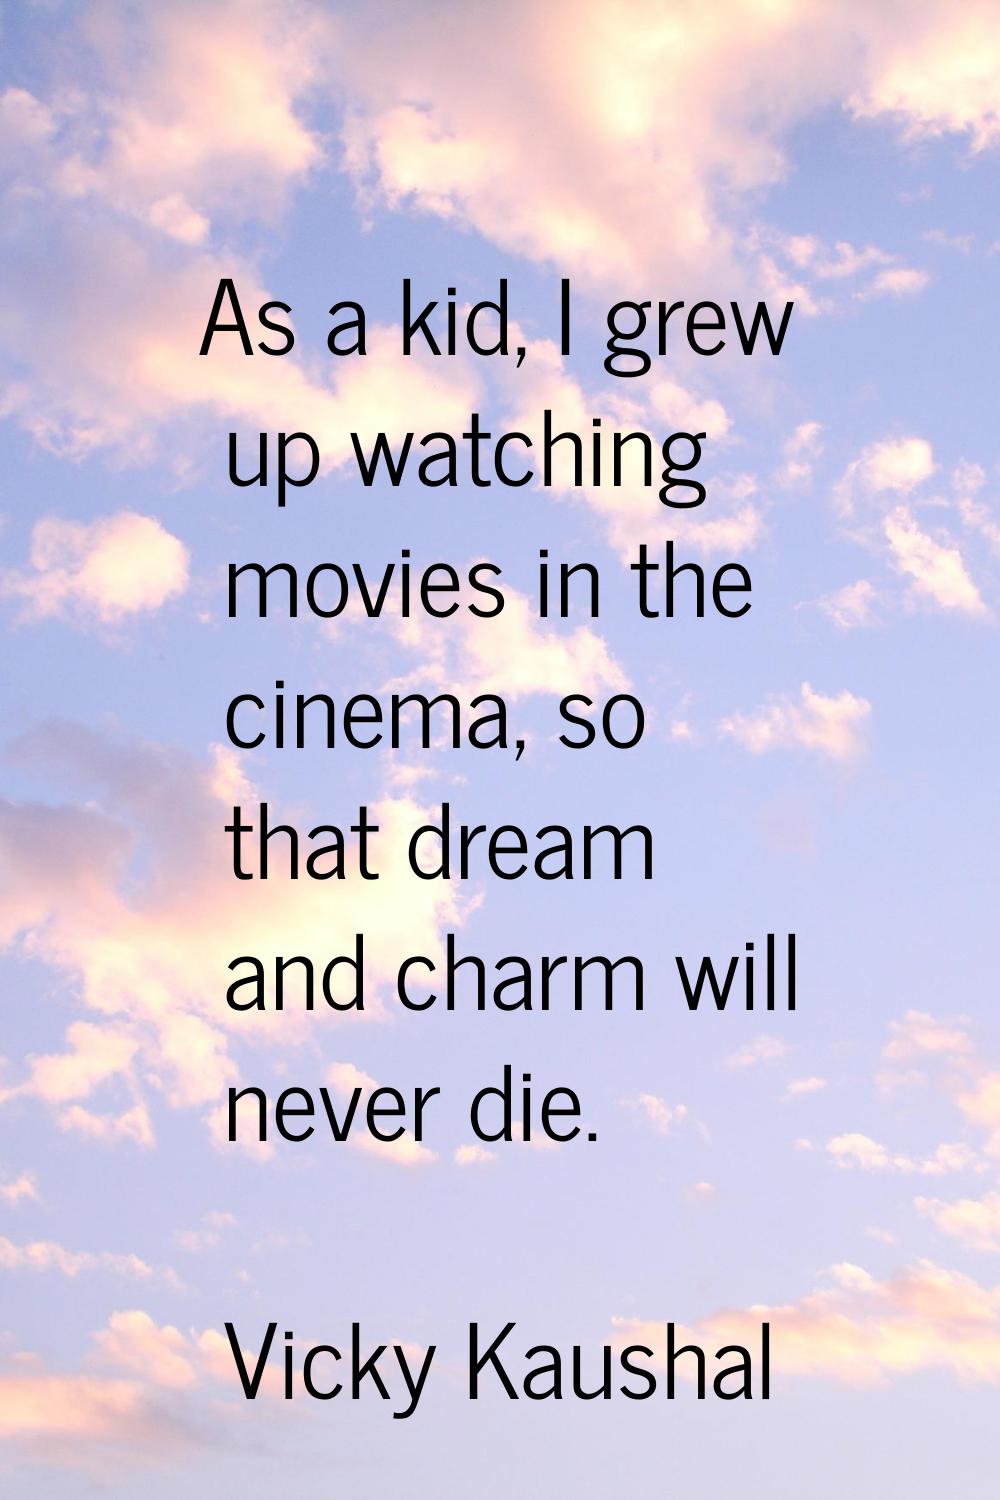 As a kid, I grew up watching movies in the cinema, so that dream and charm will never die.